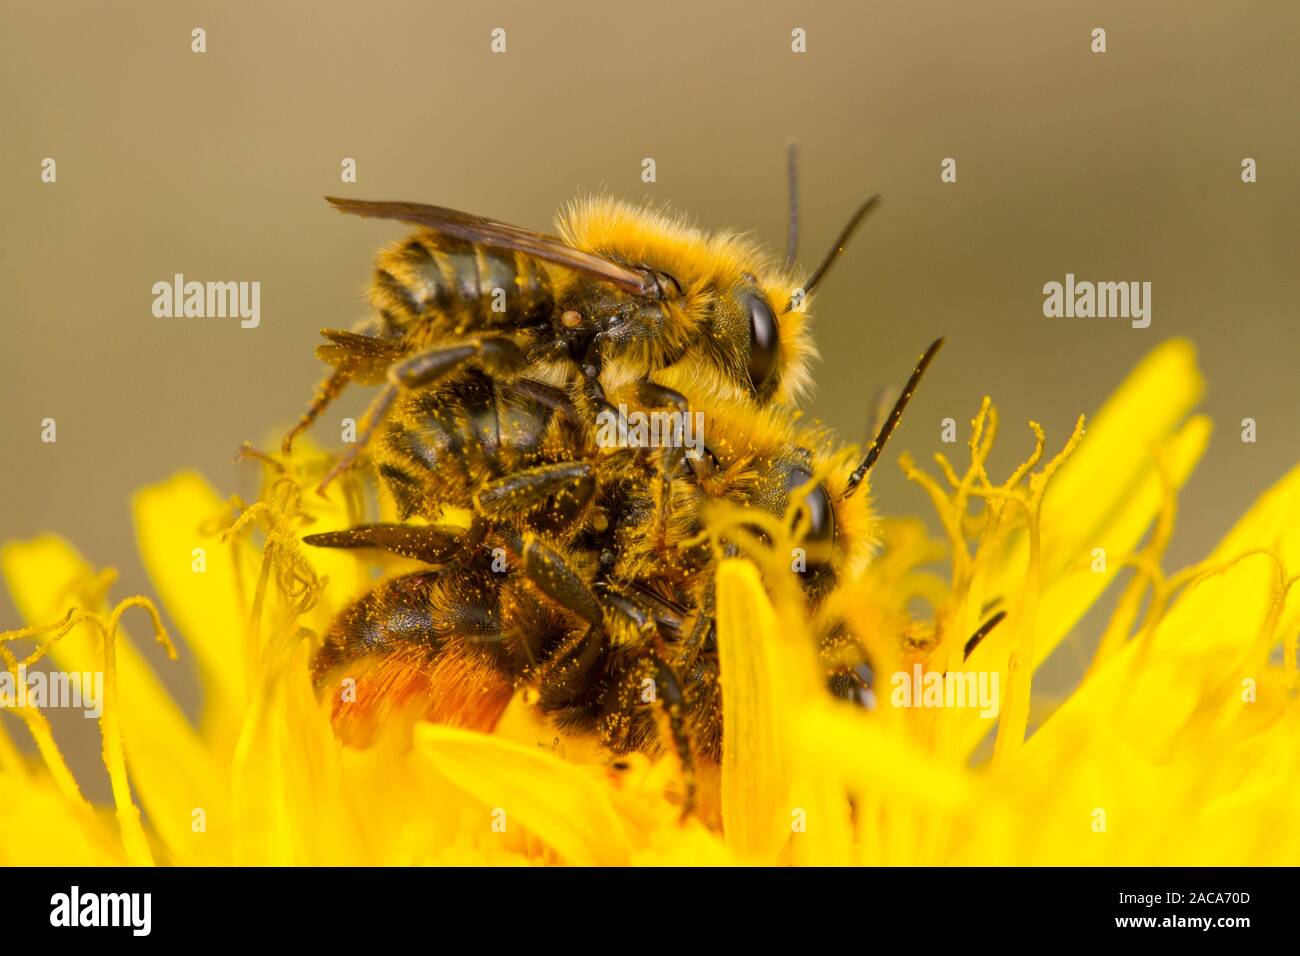 Orange-vented Mason bees (Osmia leaiana) adults mating in a dandelion flower. Powys, Wales. May. Stock Photo